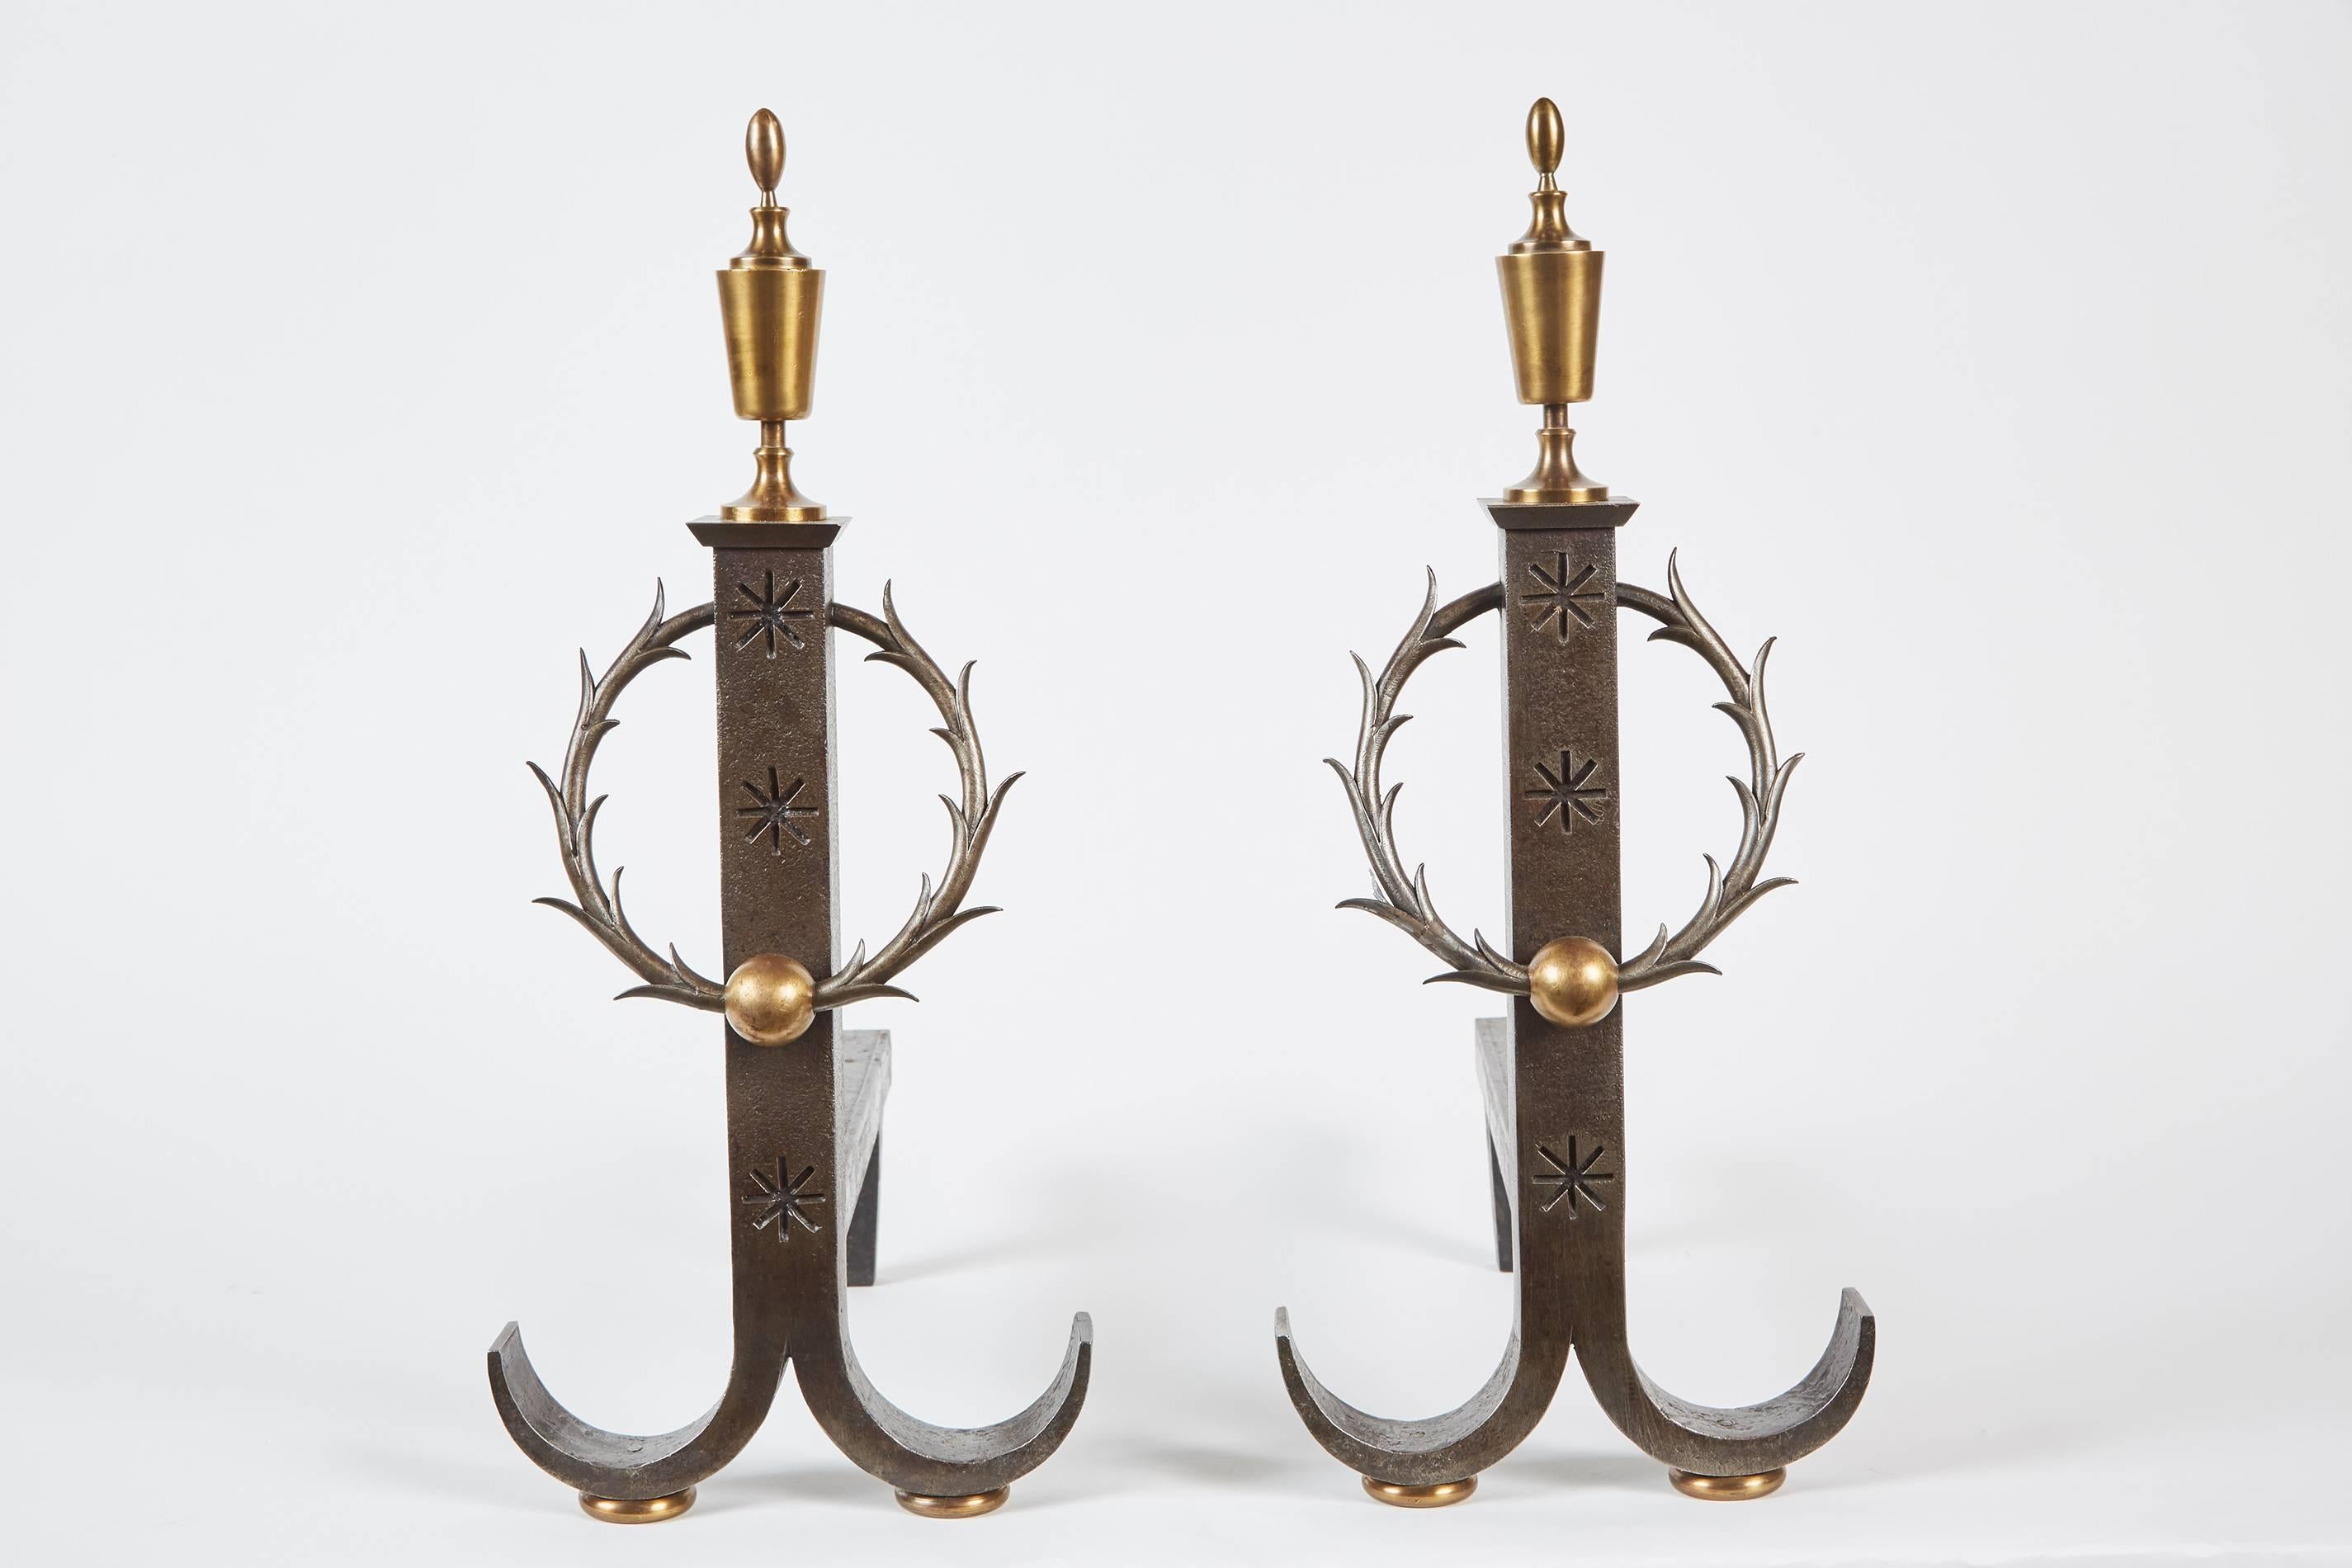 A handsome pair of late 19th-early 20th century wrought iron andirons by Samuel Yellin. The two feature finials on each andiron, a body with carved star designs and a centre wreath.